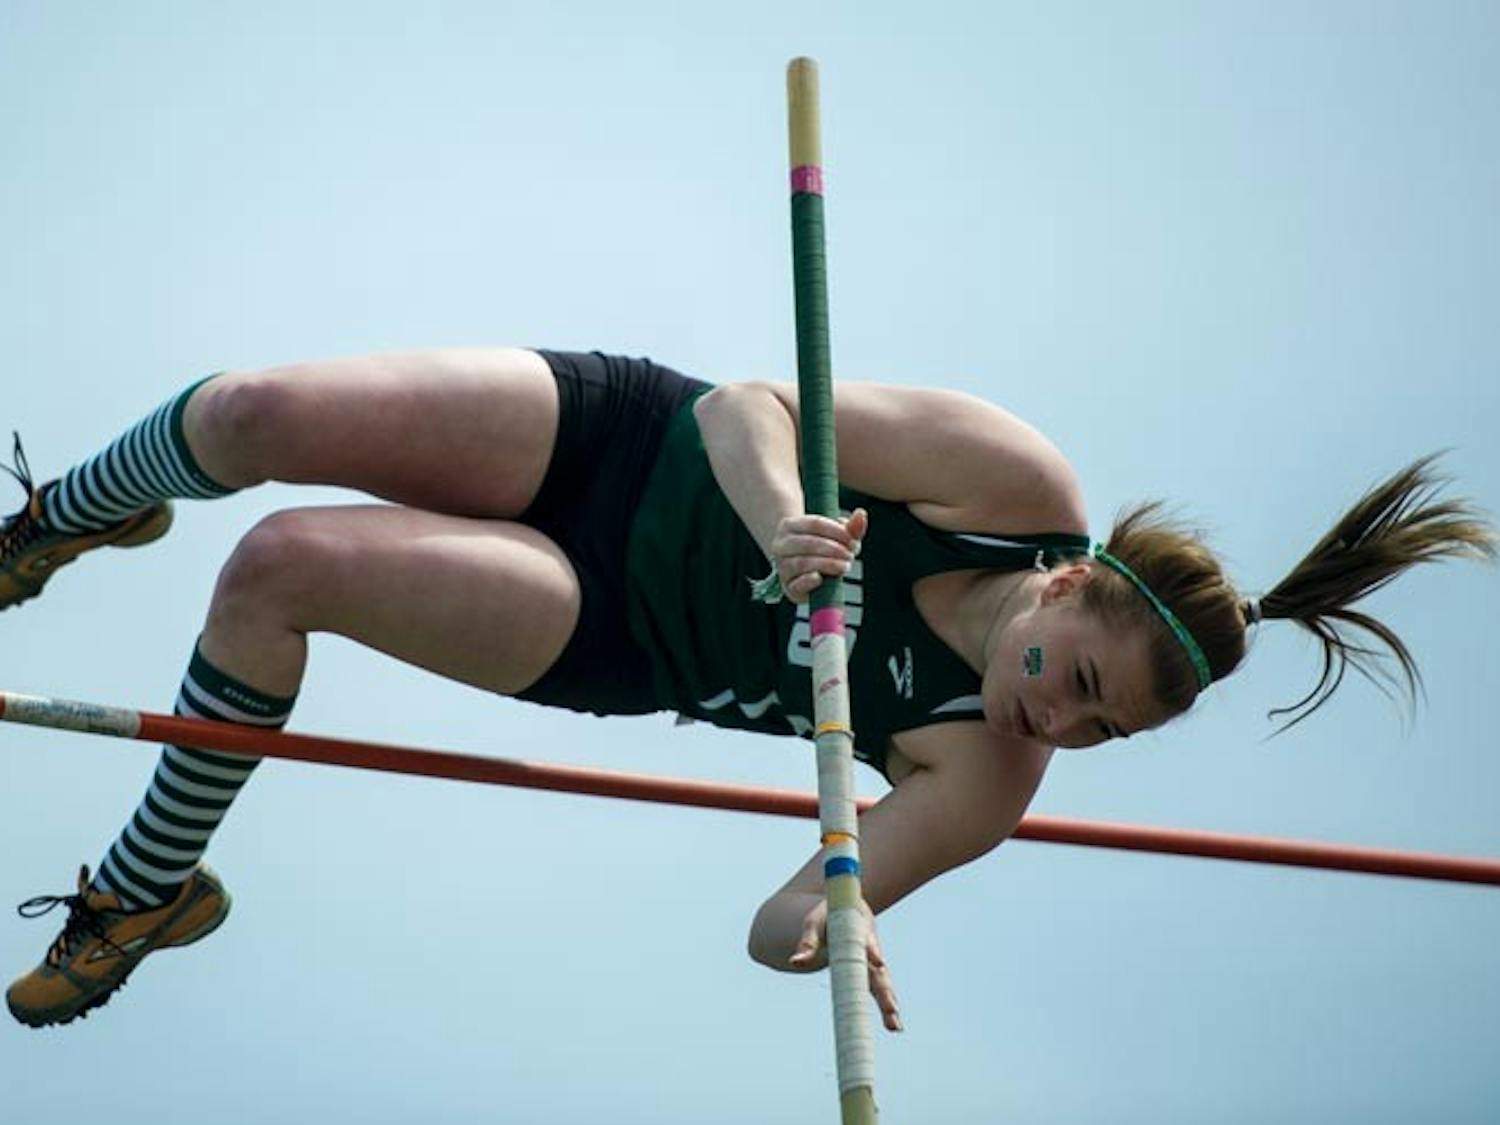 Track & Field: Ohio stays strong despite conditions  